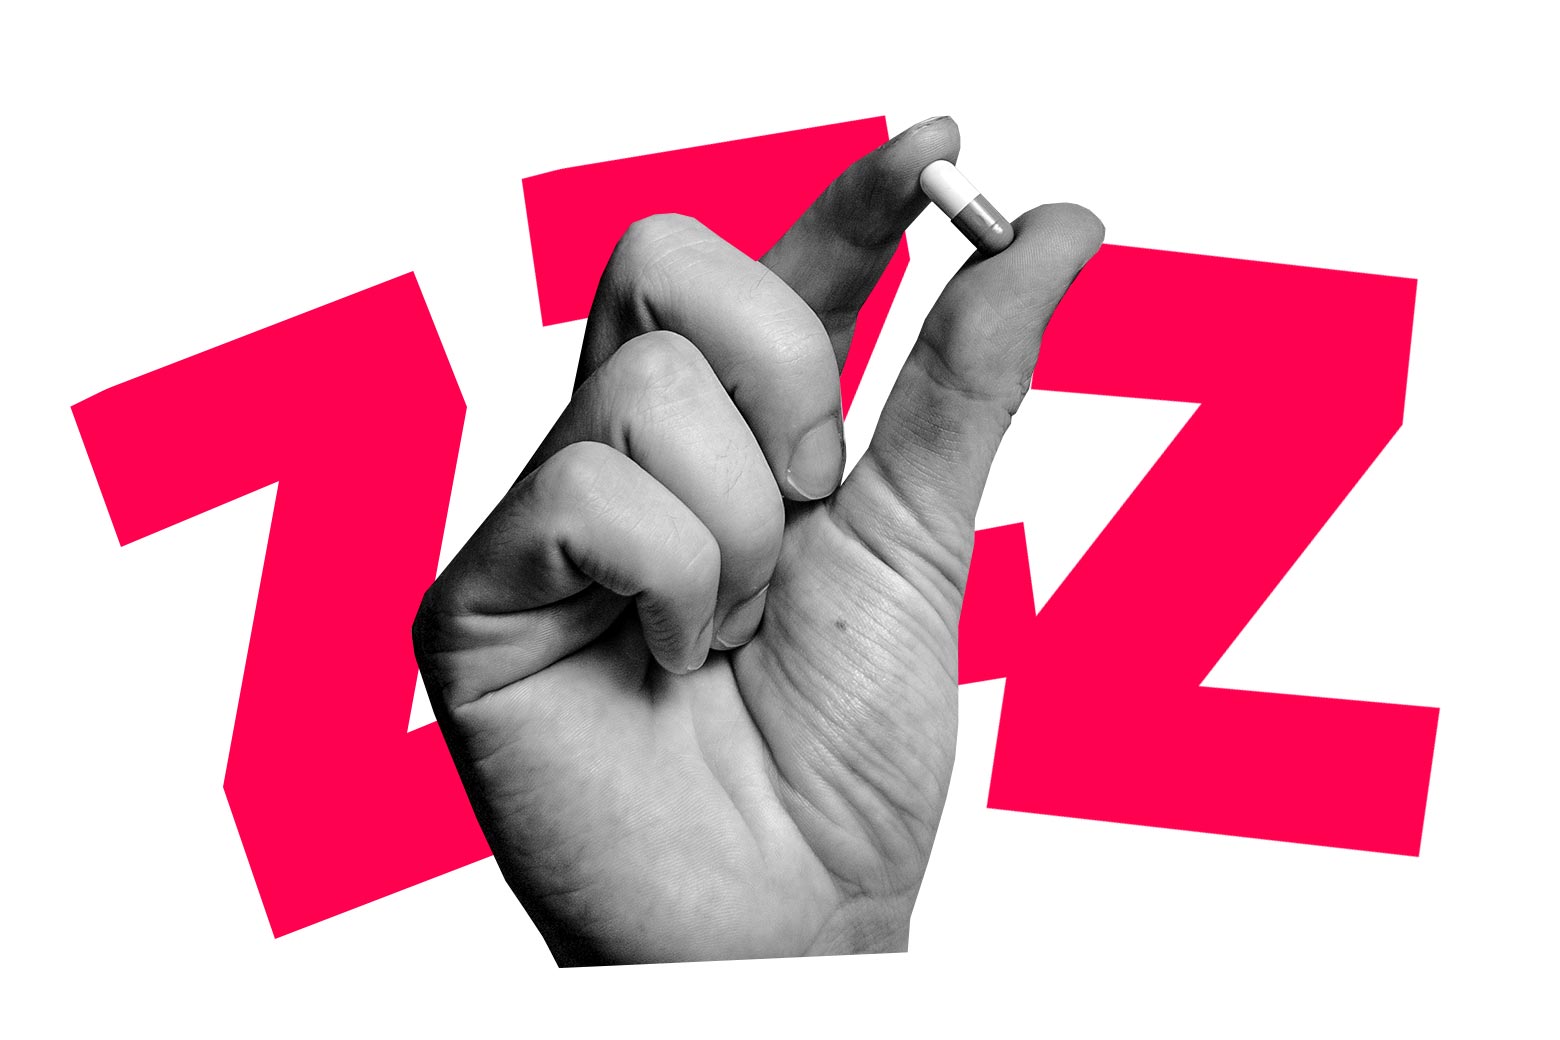 A hand holds a pill. In the background, "ZZZ" is seen graphically.